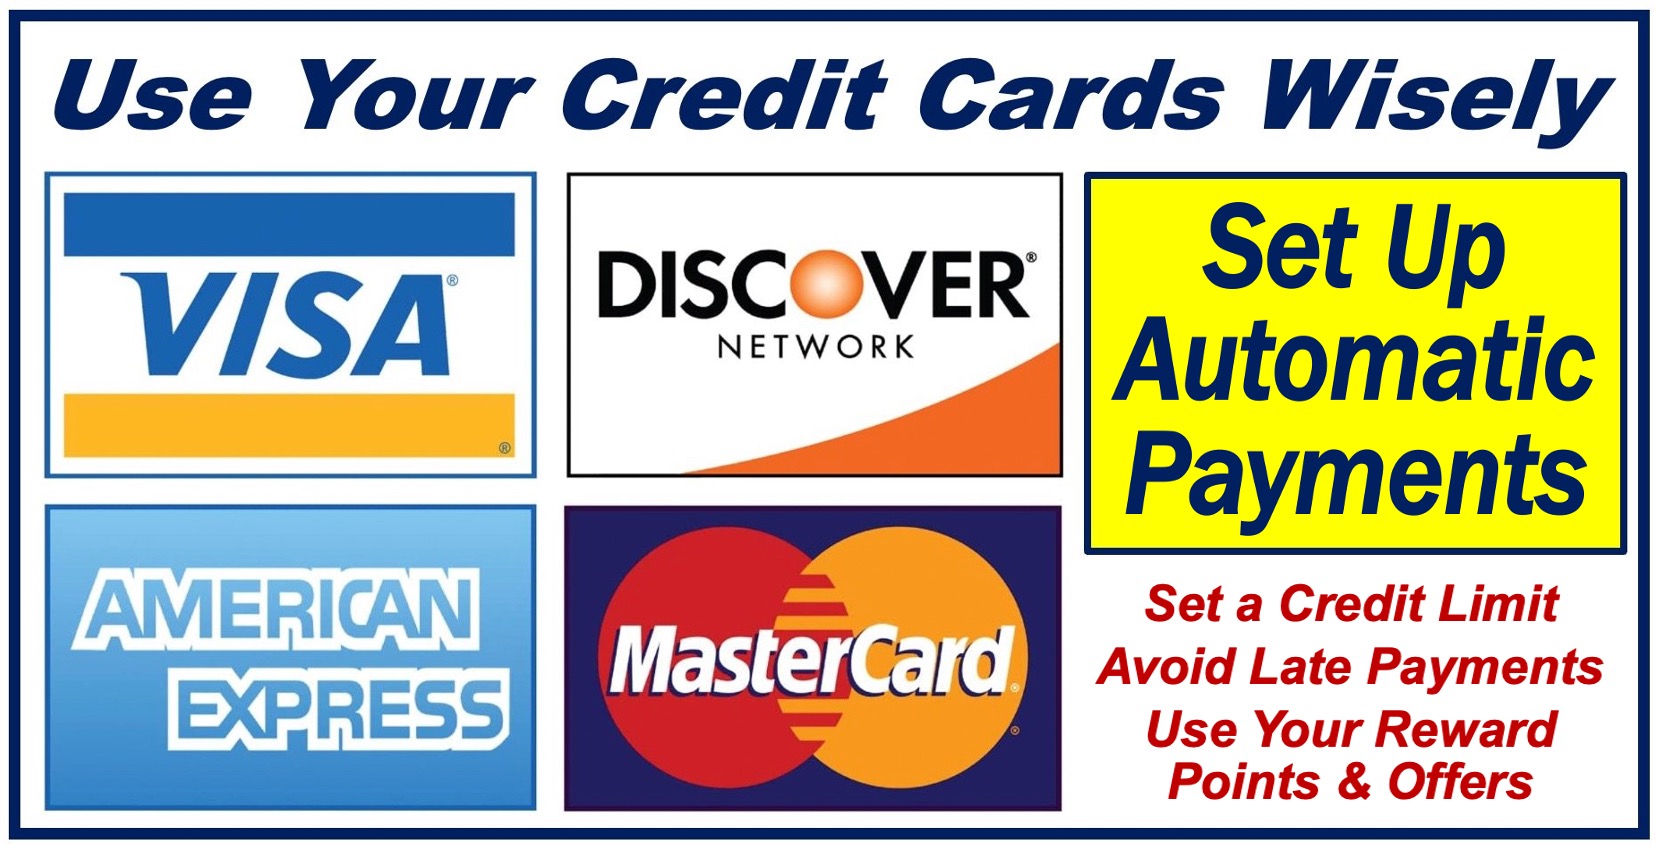 Use your credit card wisely - 49939